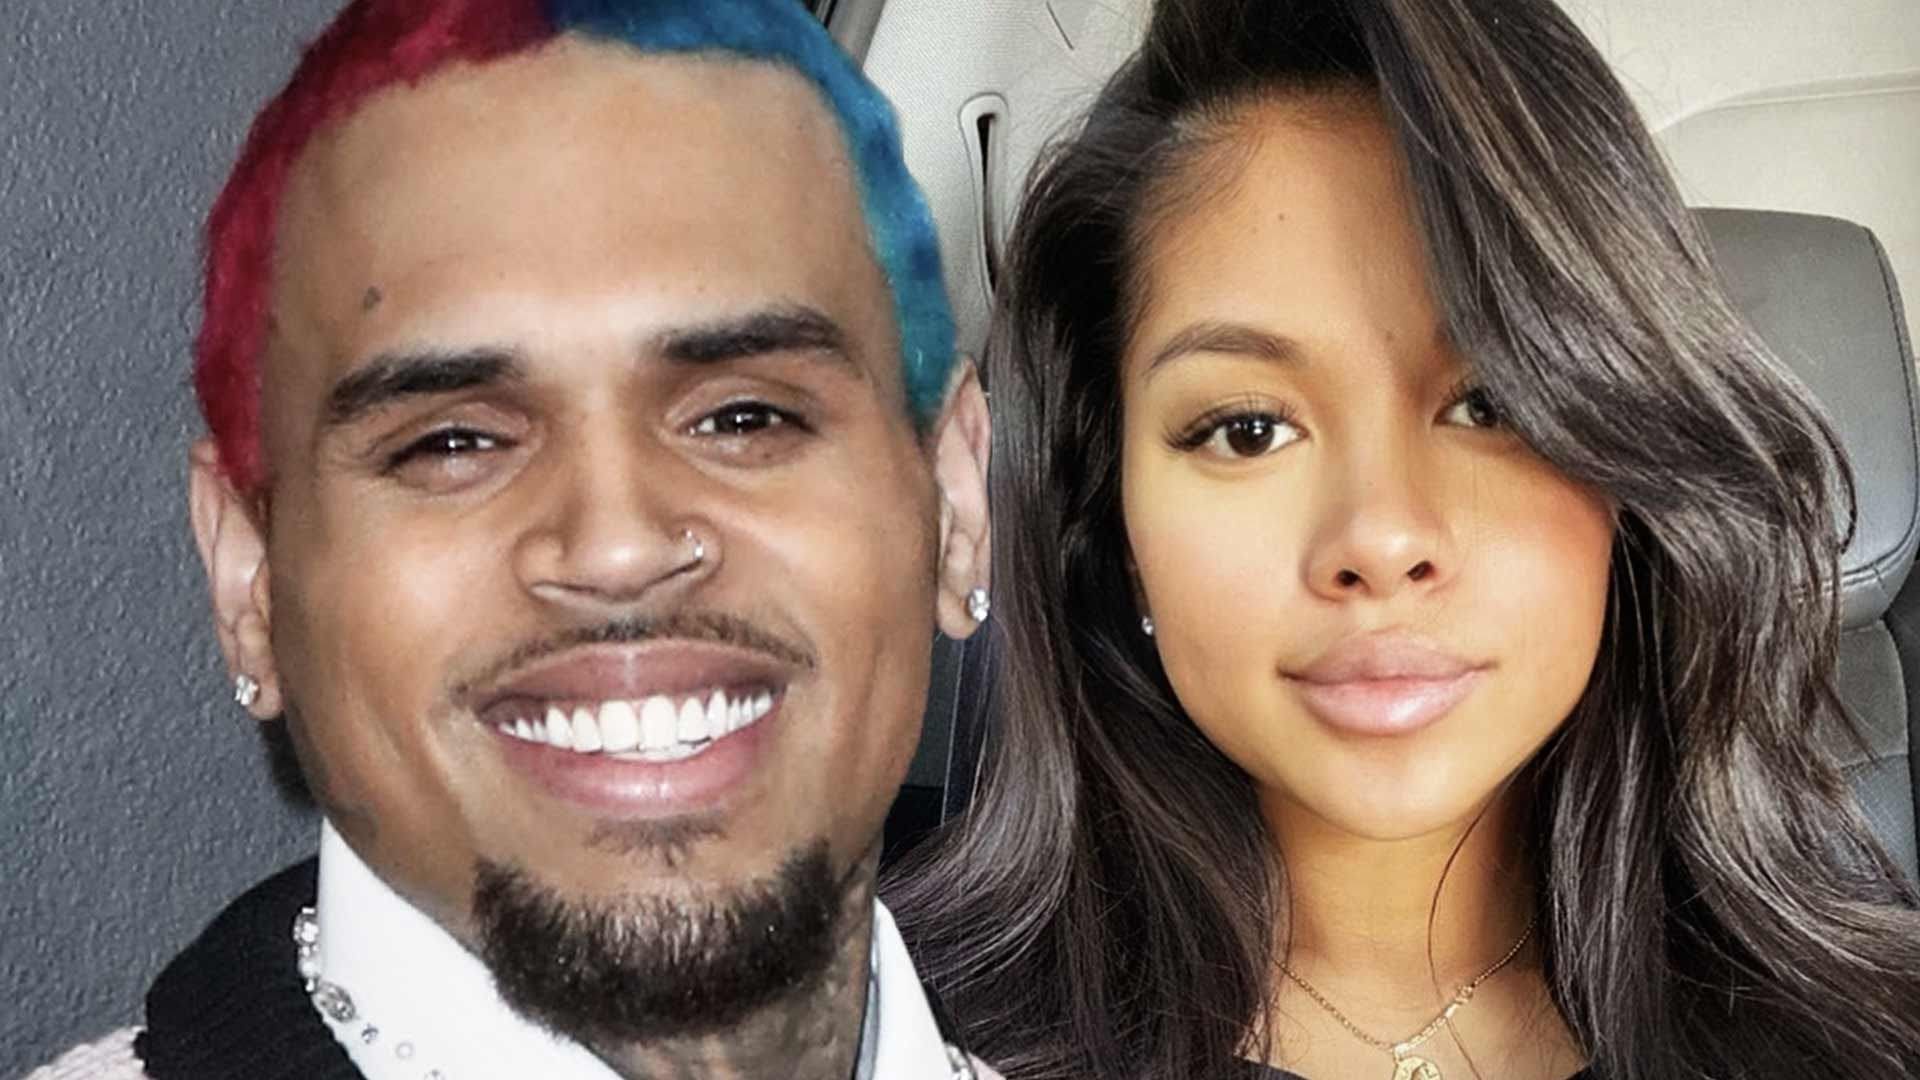 Ammika Harris Publicly Flaunts Her Pride For Chris Brown's Latest Work - See Her Message For Him